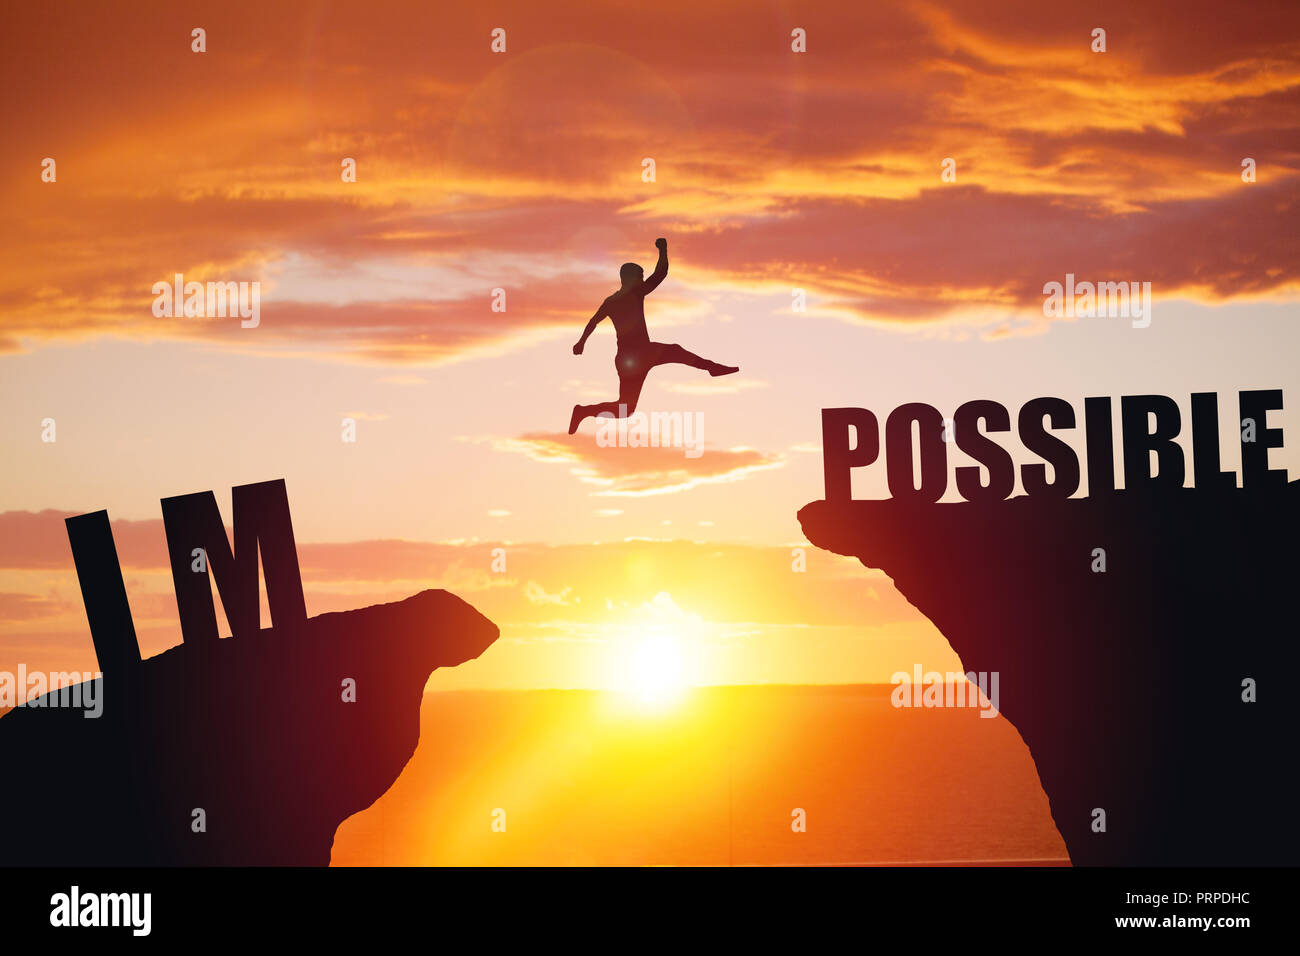 Man jumping over impossible or possible over cliff on sunset background Stock Photo